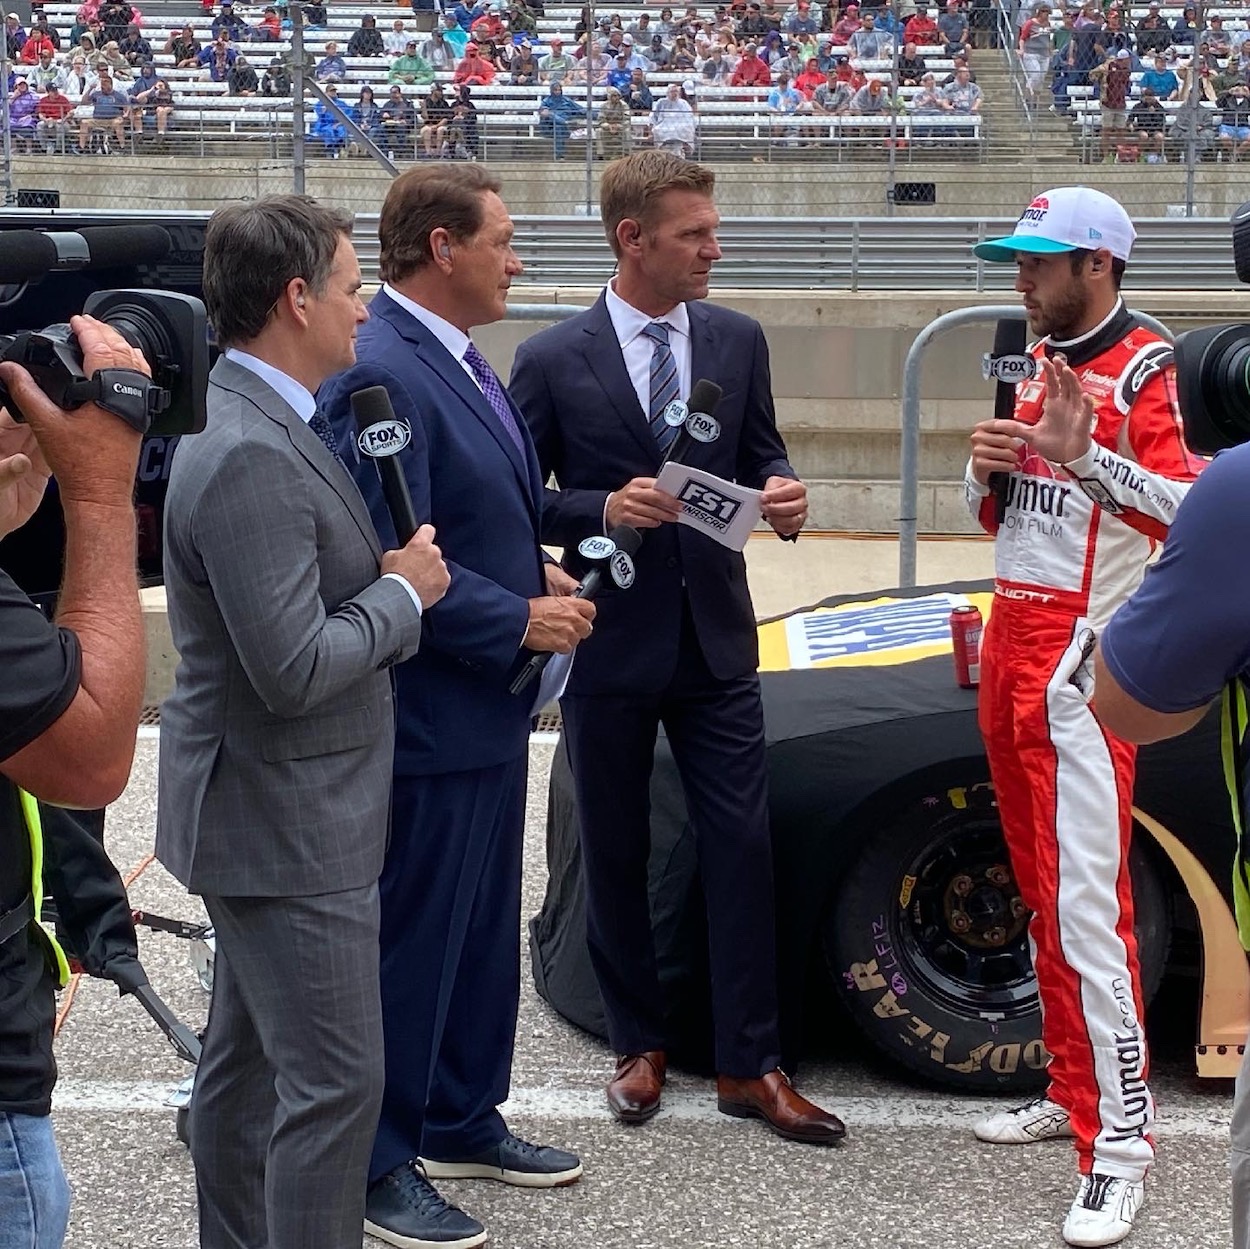 Fox NASCAR broadcast with Clint Bowyer, Jeff Gordon, and Chris Myers